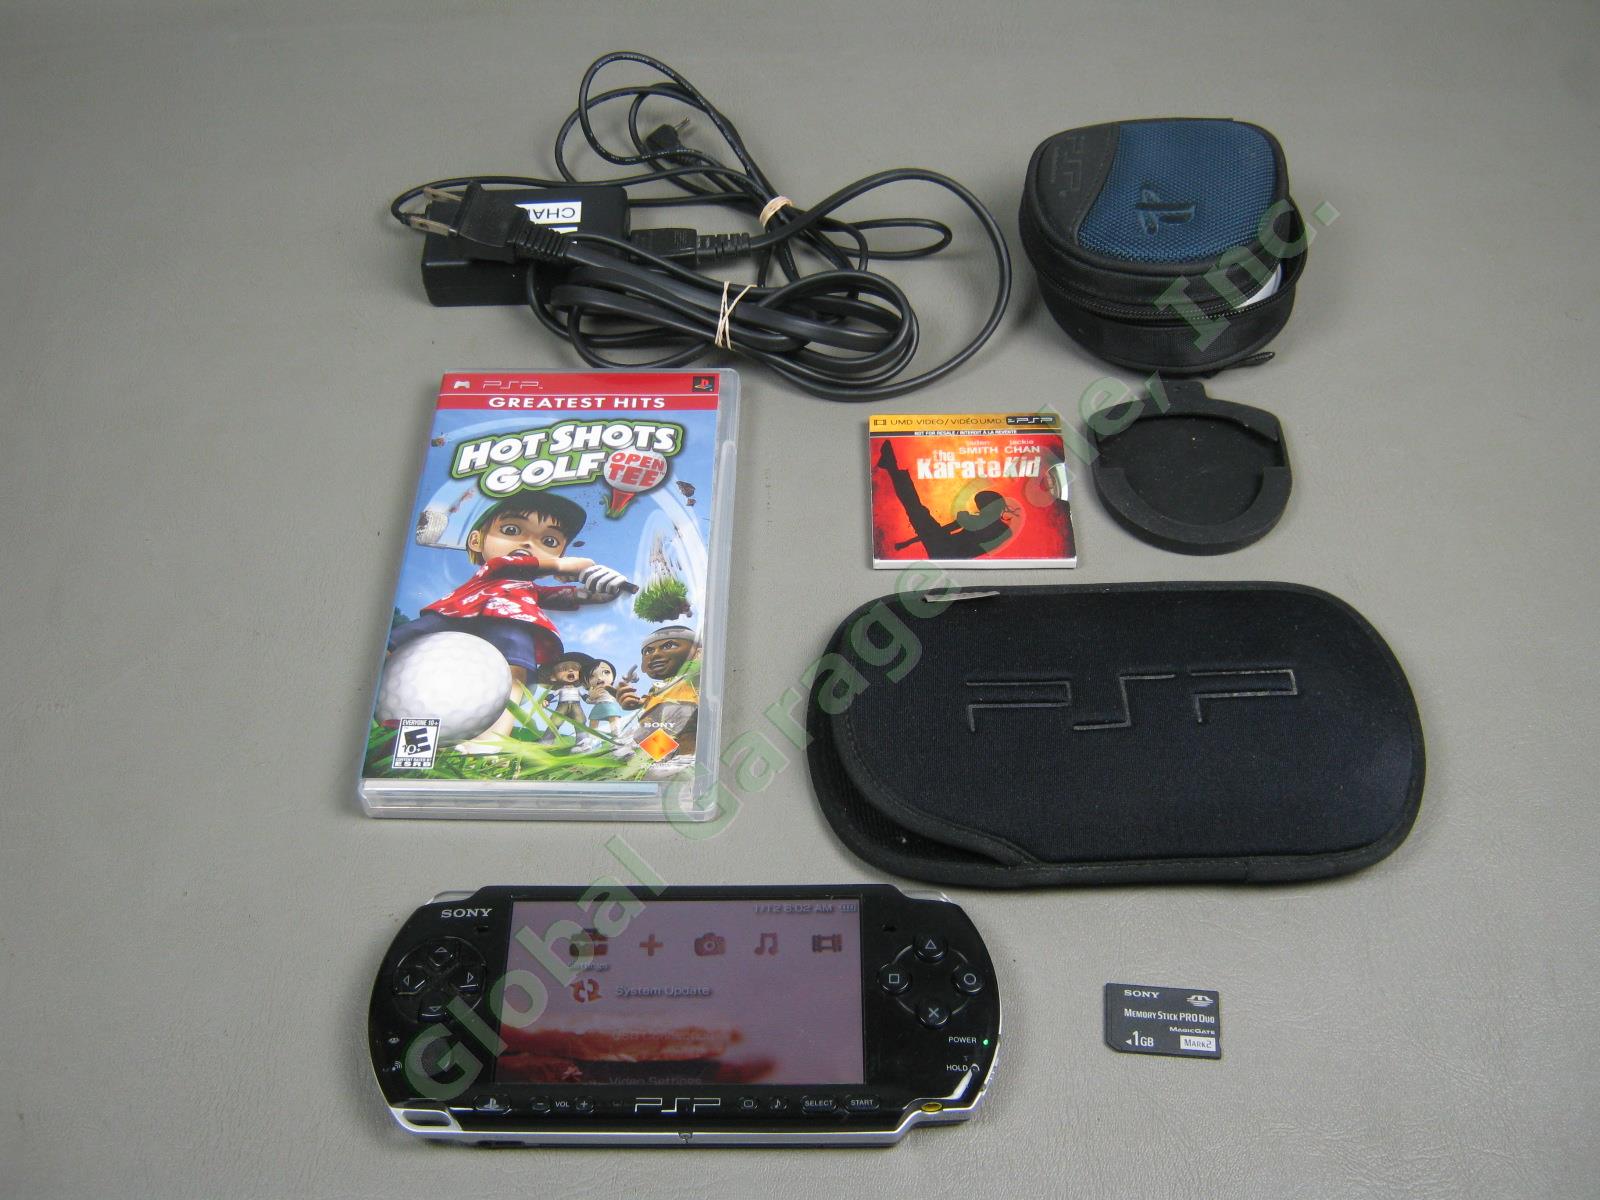 Sony PSP-2000 + Charger Battery 8 Games 1 Movie 1GB Memory Card Case Bundle Lot